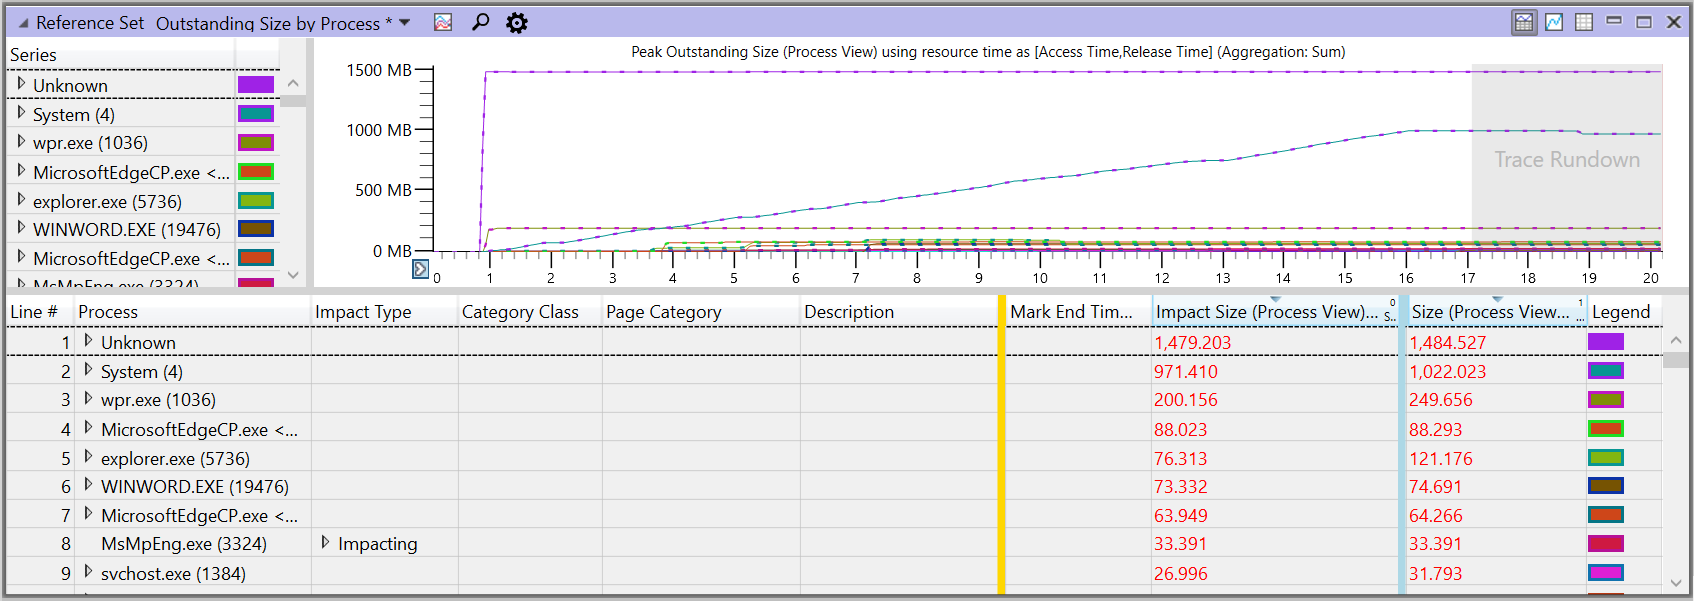 Example of the 'Outstanding Size by Process' view in Windows Performance Analyzer (WPA).